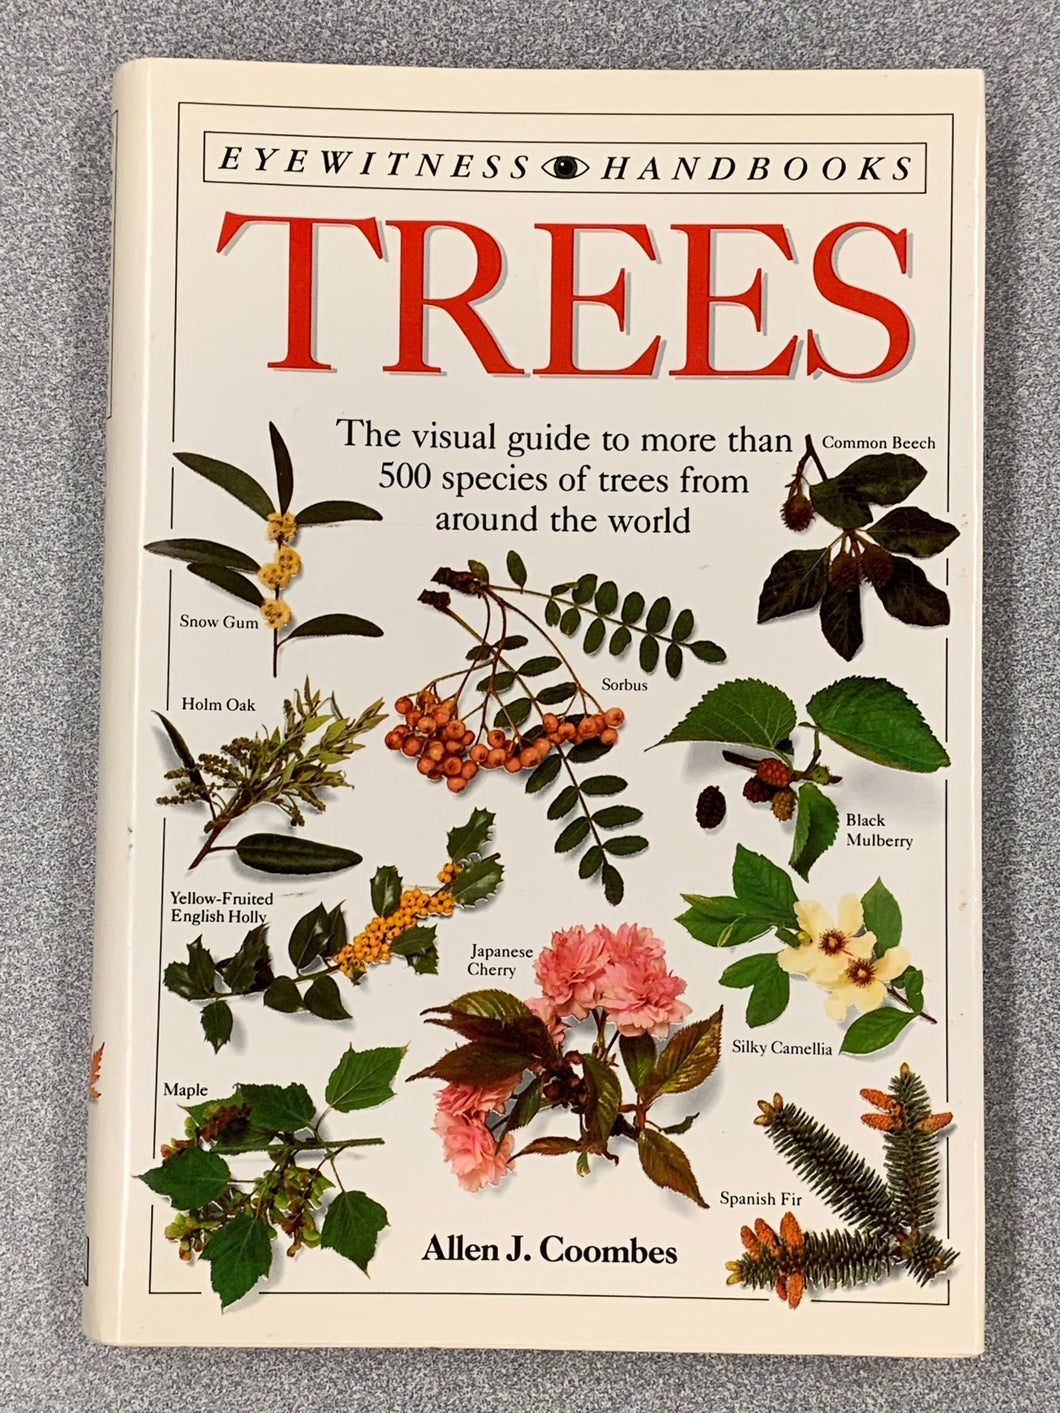 Trees: The Visual Guide to More than 500 Species of Trees from Around the World, Allen J. Coombes [1992] sn 5/21